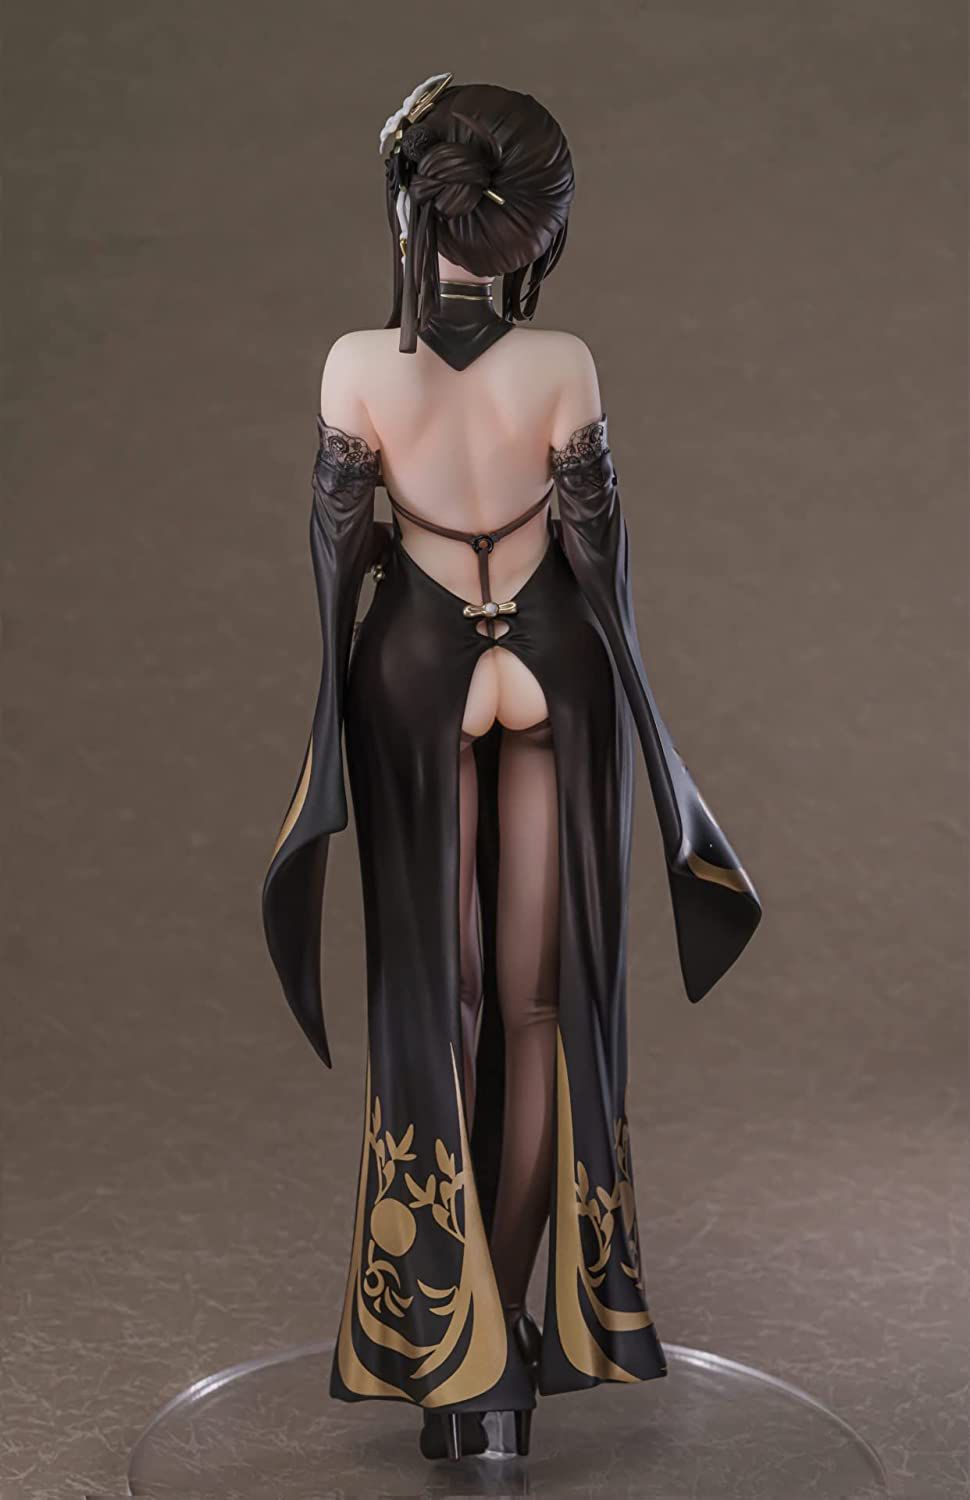 "Azure Lane" A ridiculously erotic figure with a full view of the back and buttocks from behind with the whip of the sea 10